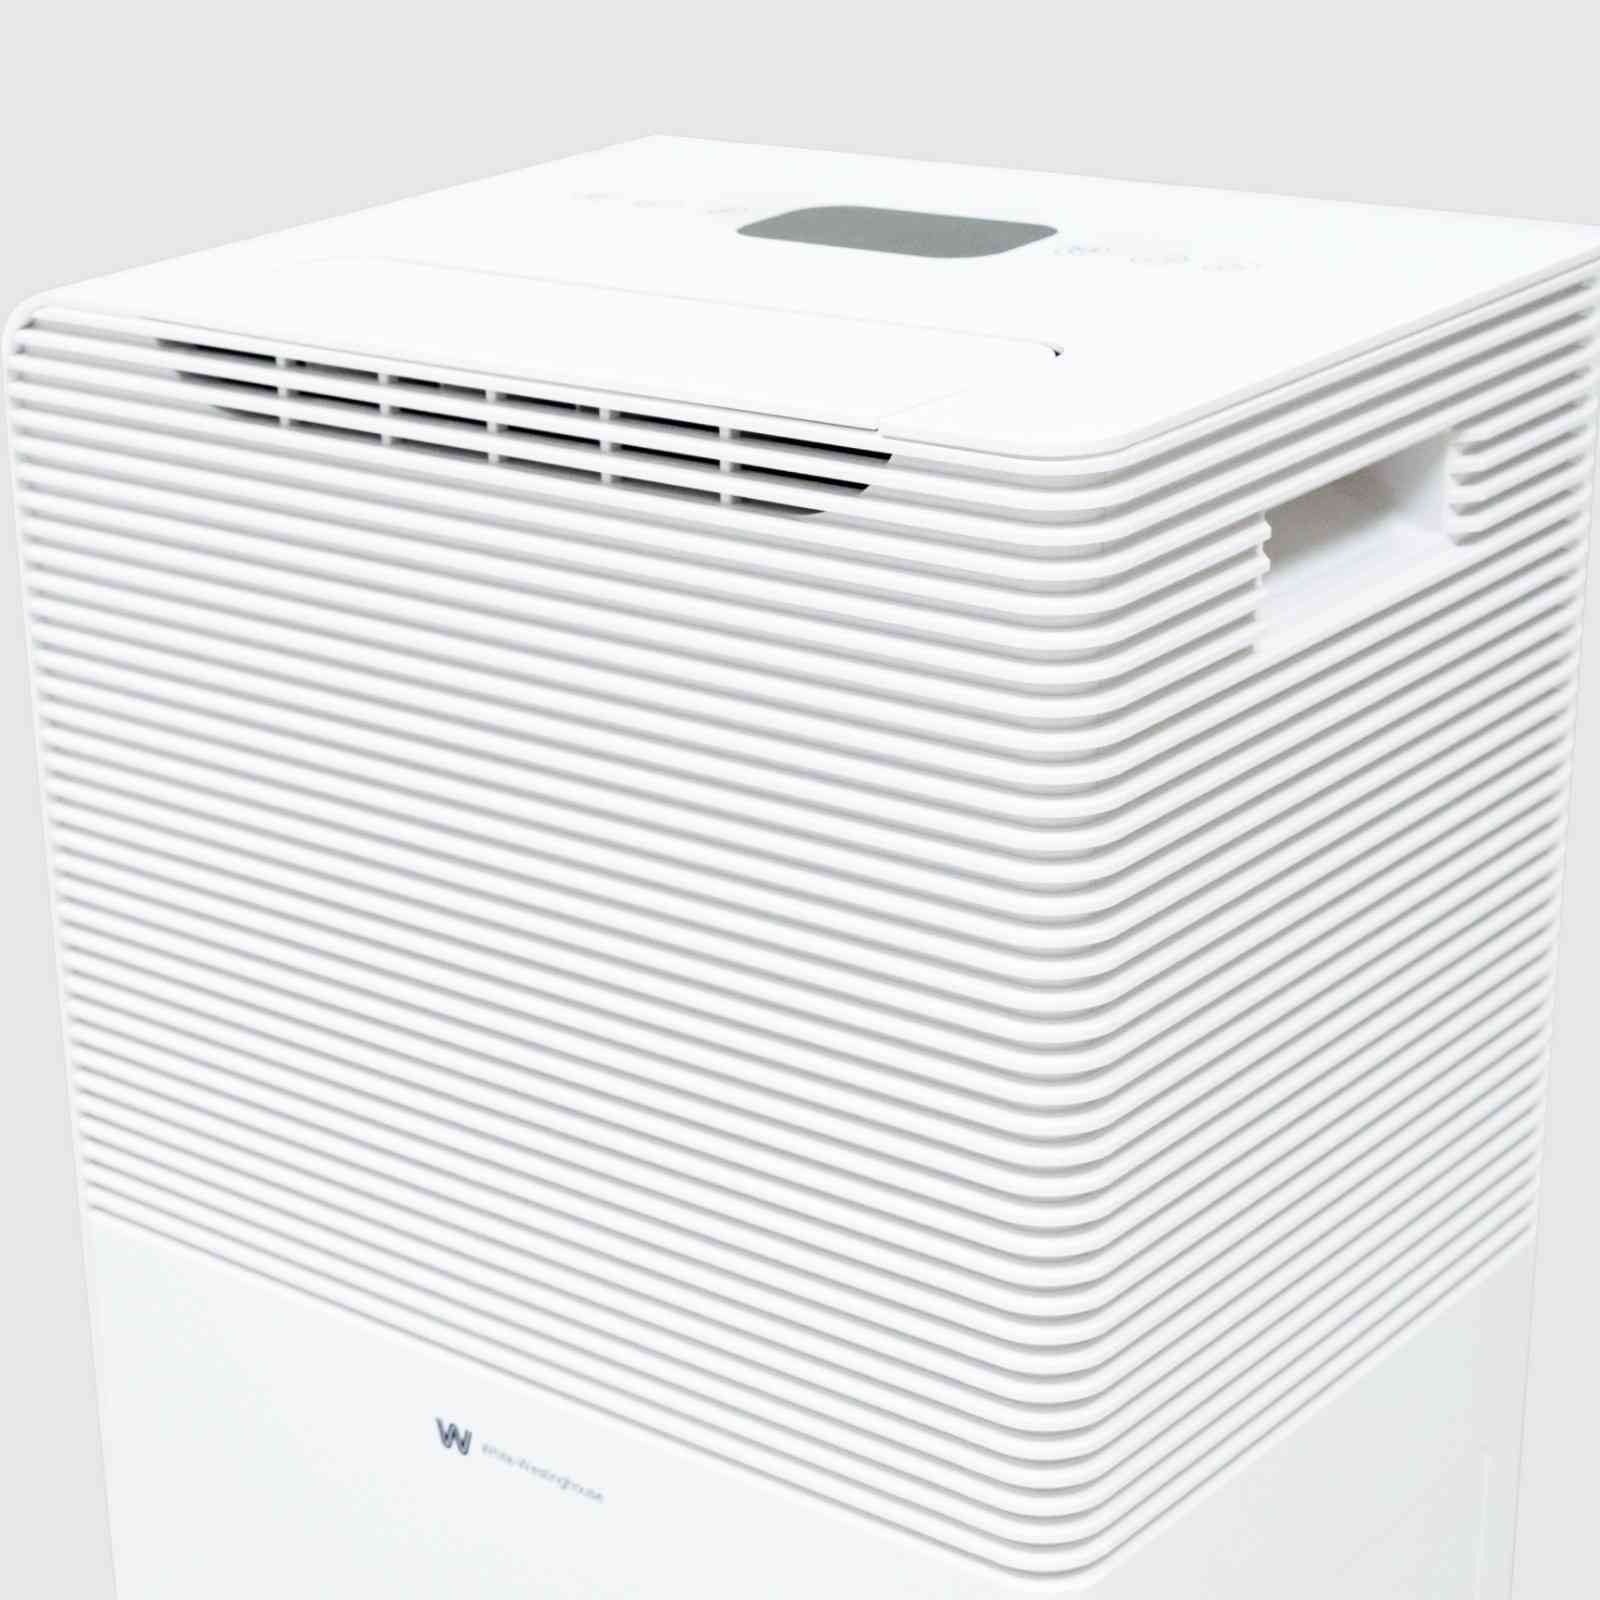 Top angled view of the White Westinghouse Dehumidifier AWHD40, showcasing the air vents, digital control panel, and built-in handle for easy mobility. The sleek white design is suitable for maintaining optimal humidity levels in residential and commercial spaces.